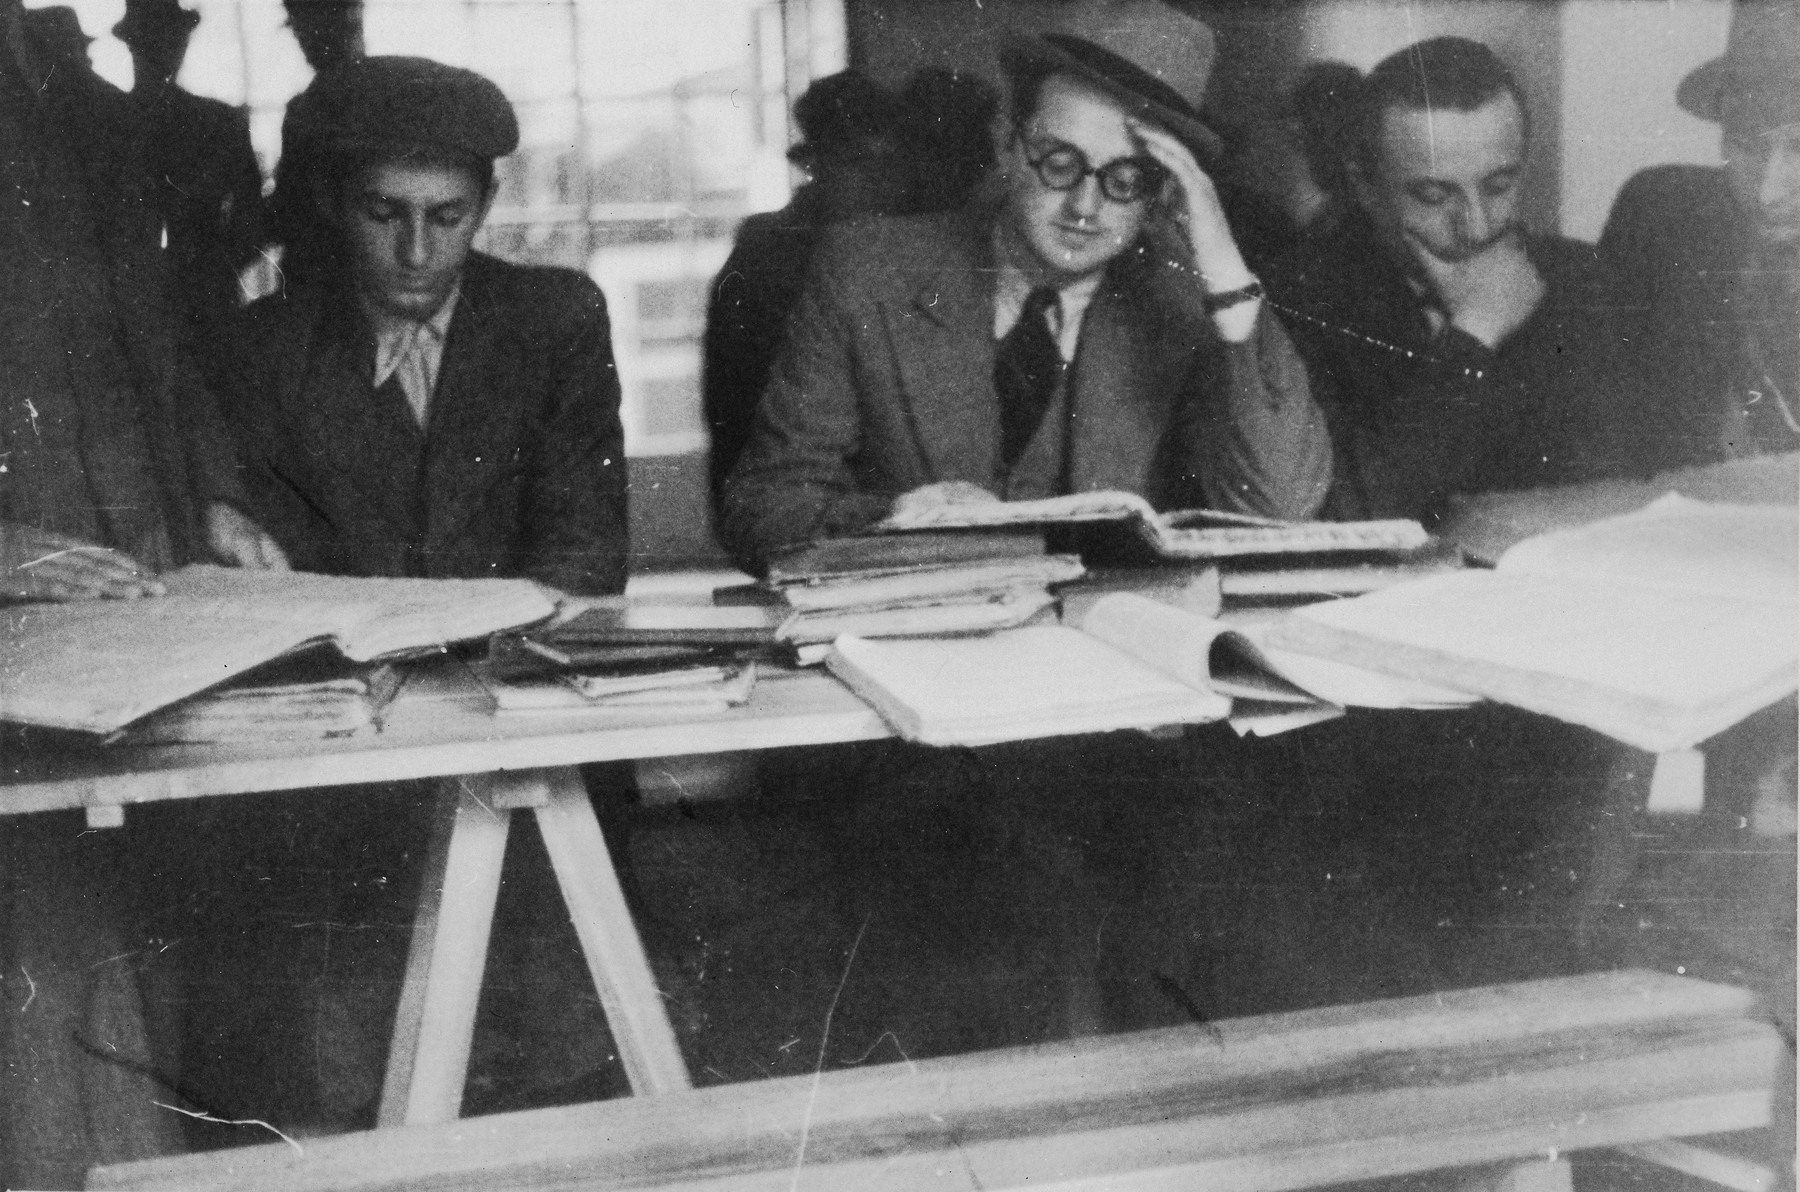 Students at the Mir Yeshiva in Kobe study around a table.

Rabbi Avraham Blumenkrantz is seated in the center and on the far right is Boruch Yaakov Alter.